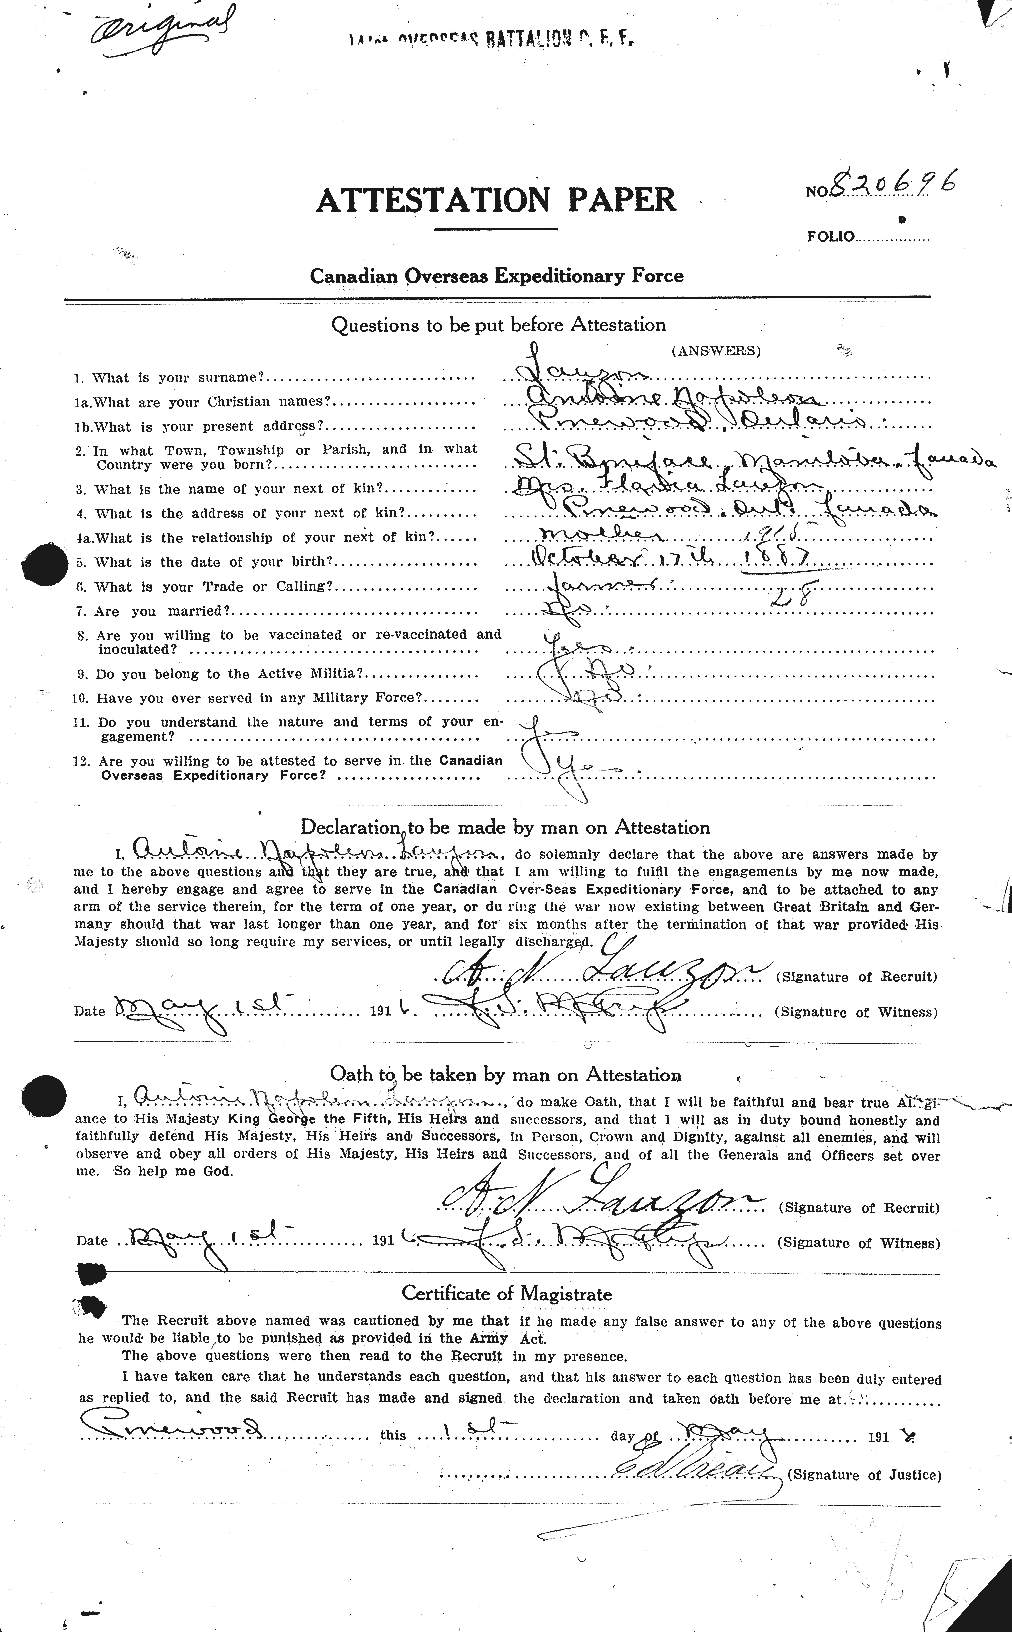 Personnel Records of the First World War - CEF 453058a